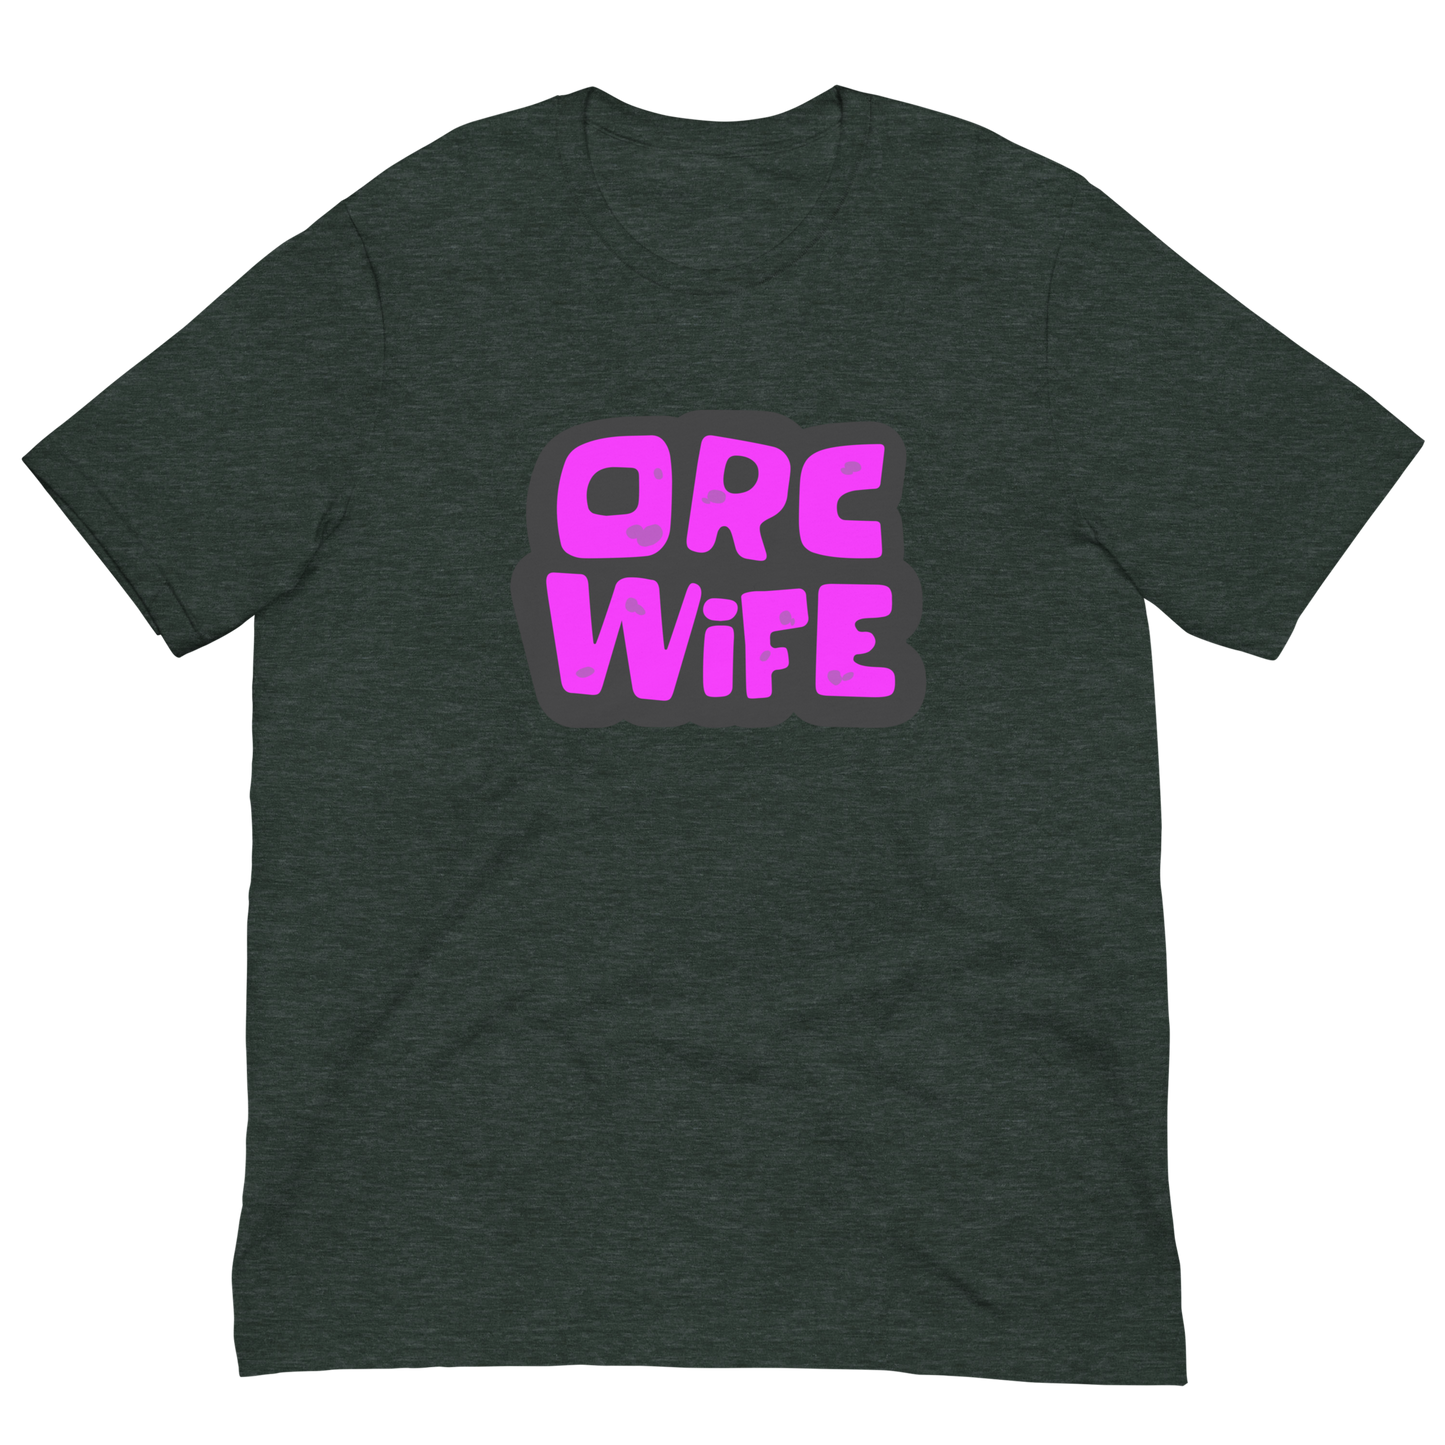 Orc Wife Shirt